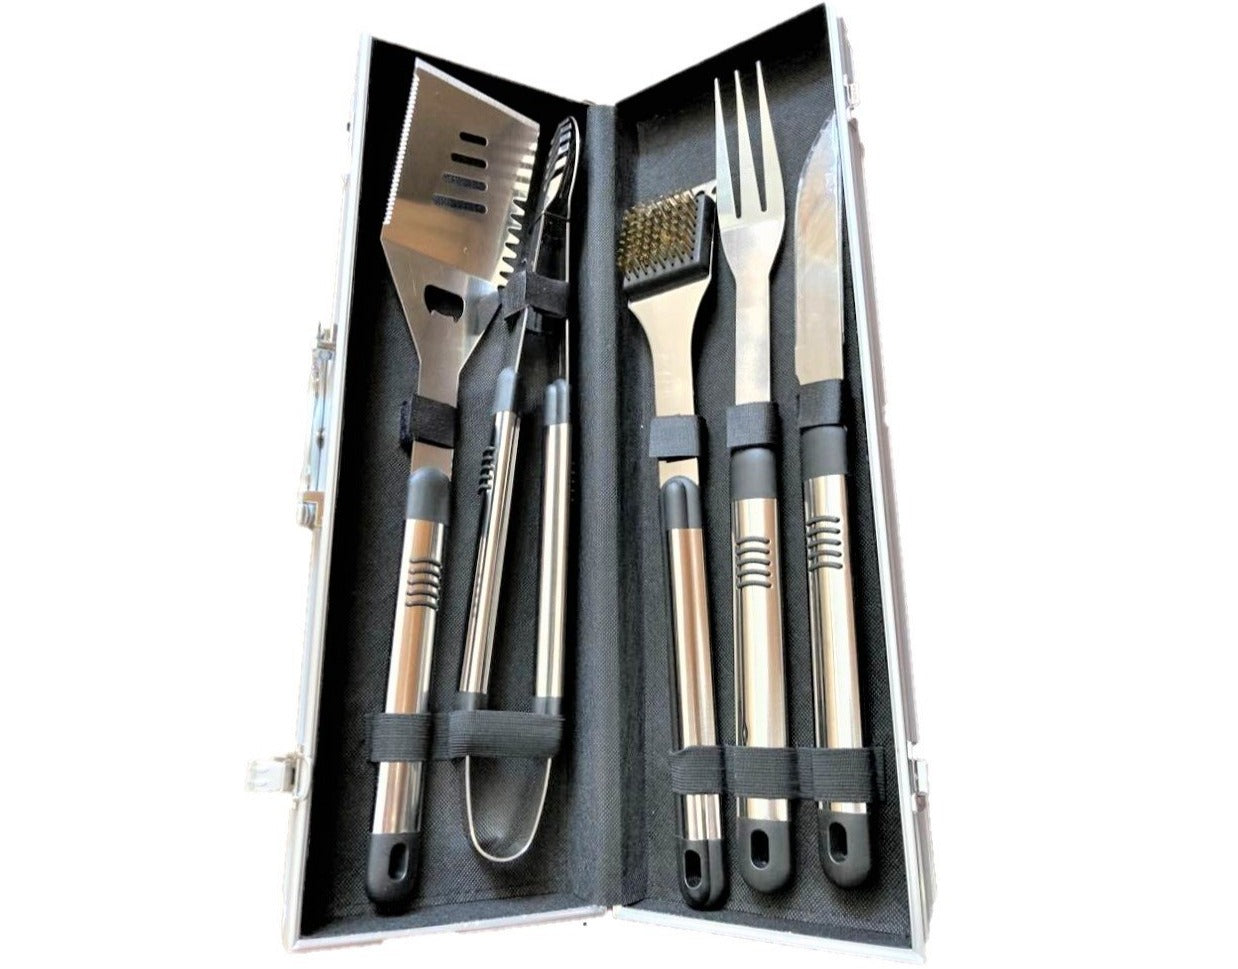 6 PC Stainless Steel Cooking Utensils Set - BBQ Grill Accessories with Aluminum Case